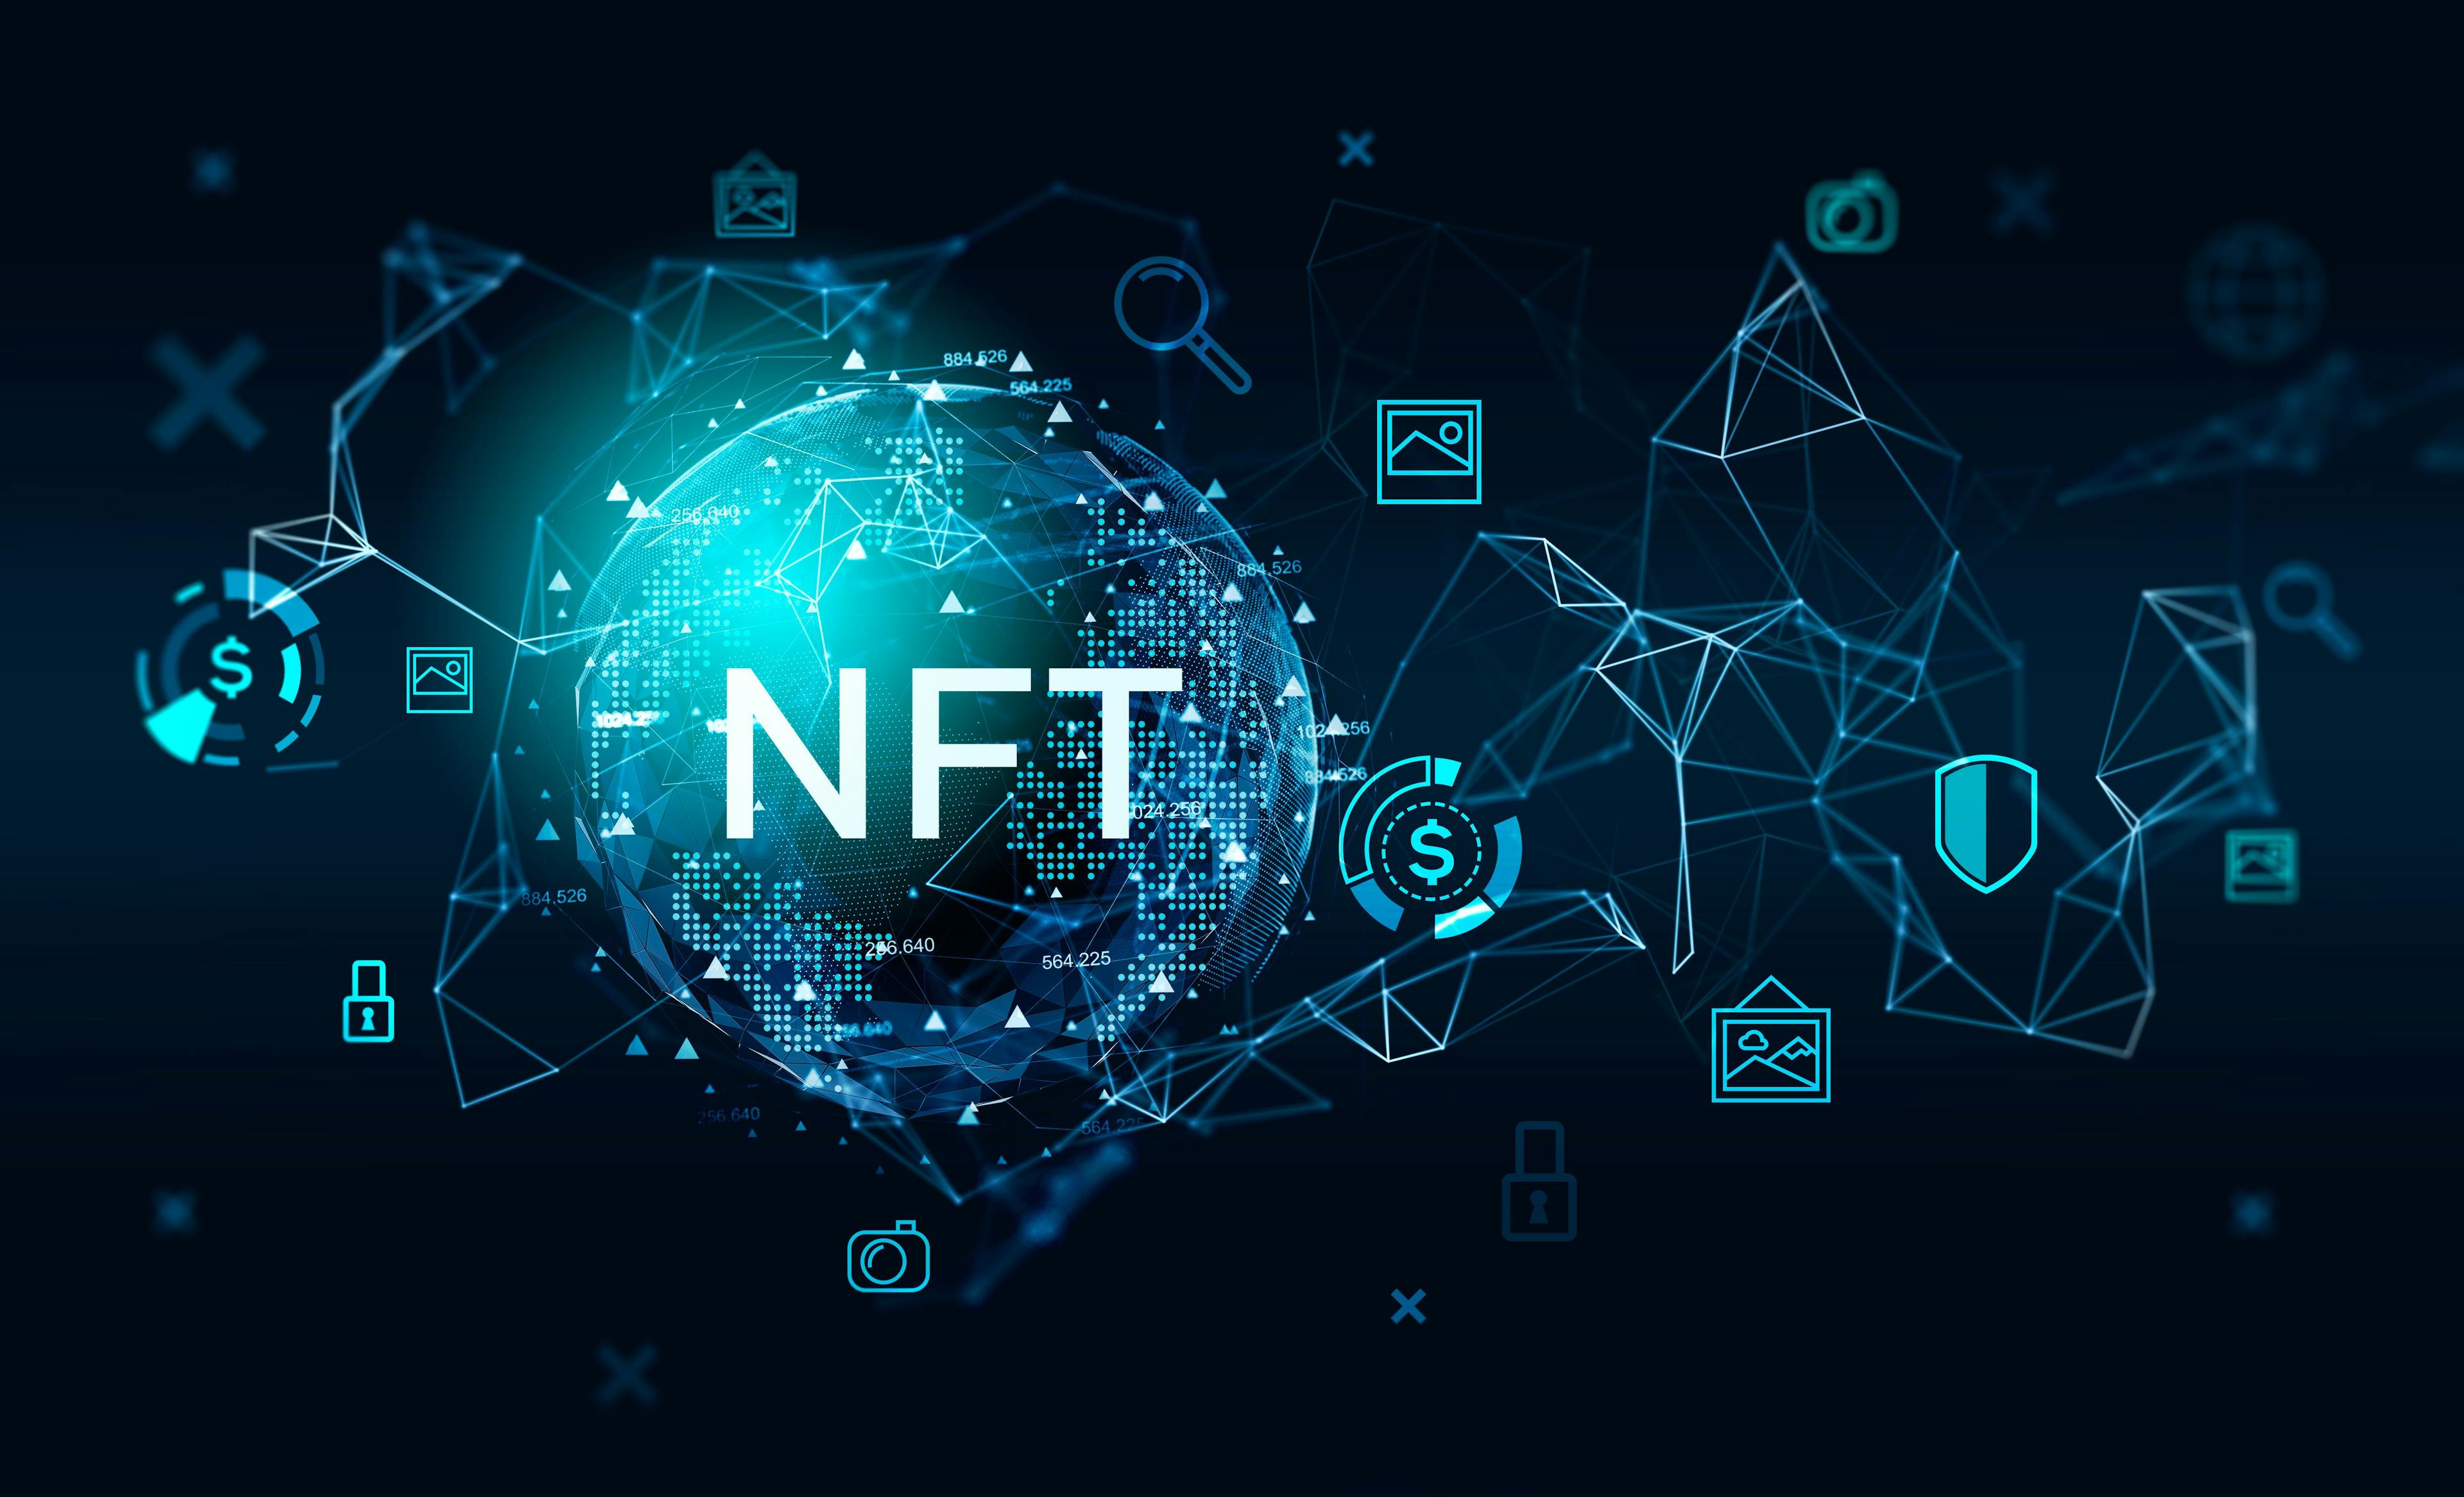 According to the study authors, using NFTs and blockchain technology to build a secure healthcare data exchange platform will greatly impact the way data is handled in both healthcare research and clinical pathways. (Image courtesy of Adobe Stock/denisismagilov)